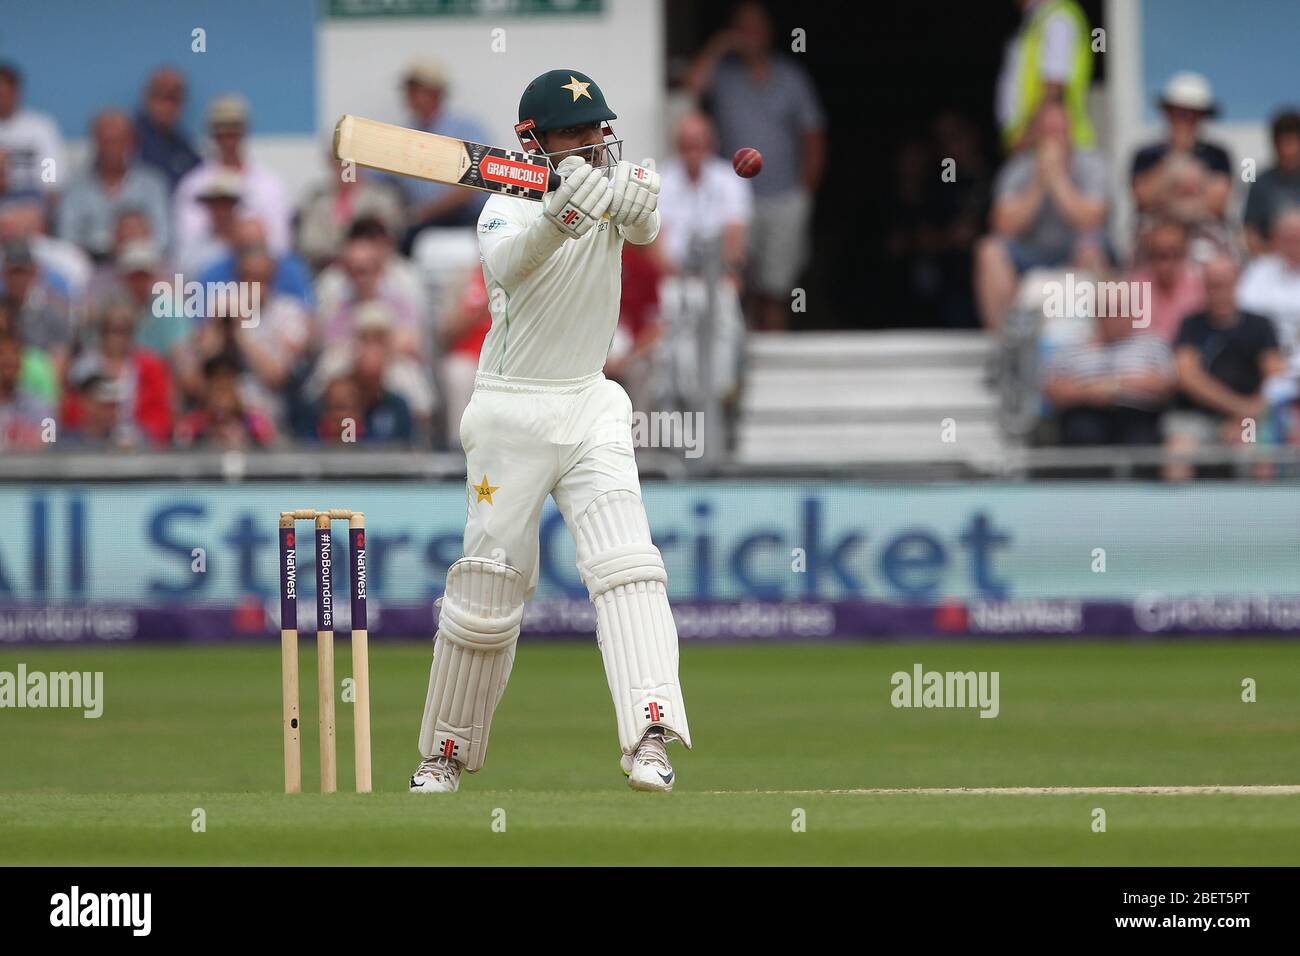 LEEDS, UK - JUNE 3rd Shadab Khan of Pakistan batting during the third day of the Second Nat West Test match between England and Pakistan at Headingley Cricket Ground, Leeds on Sunday 3rd June 2018. (Credit: Mark Fletcher | MI News) Stock Photo